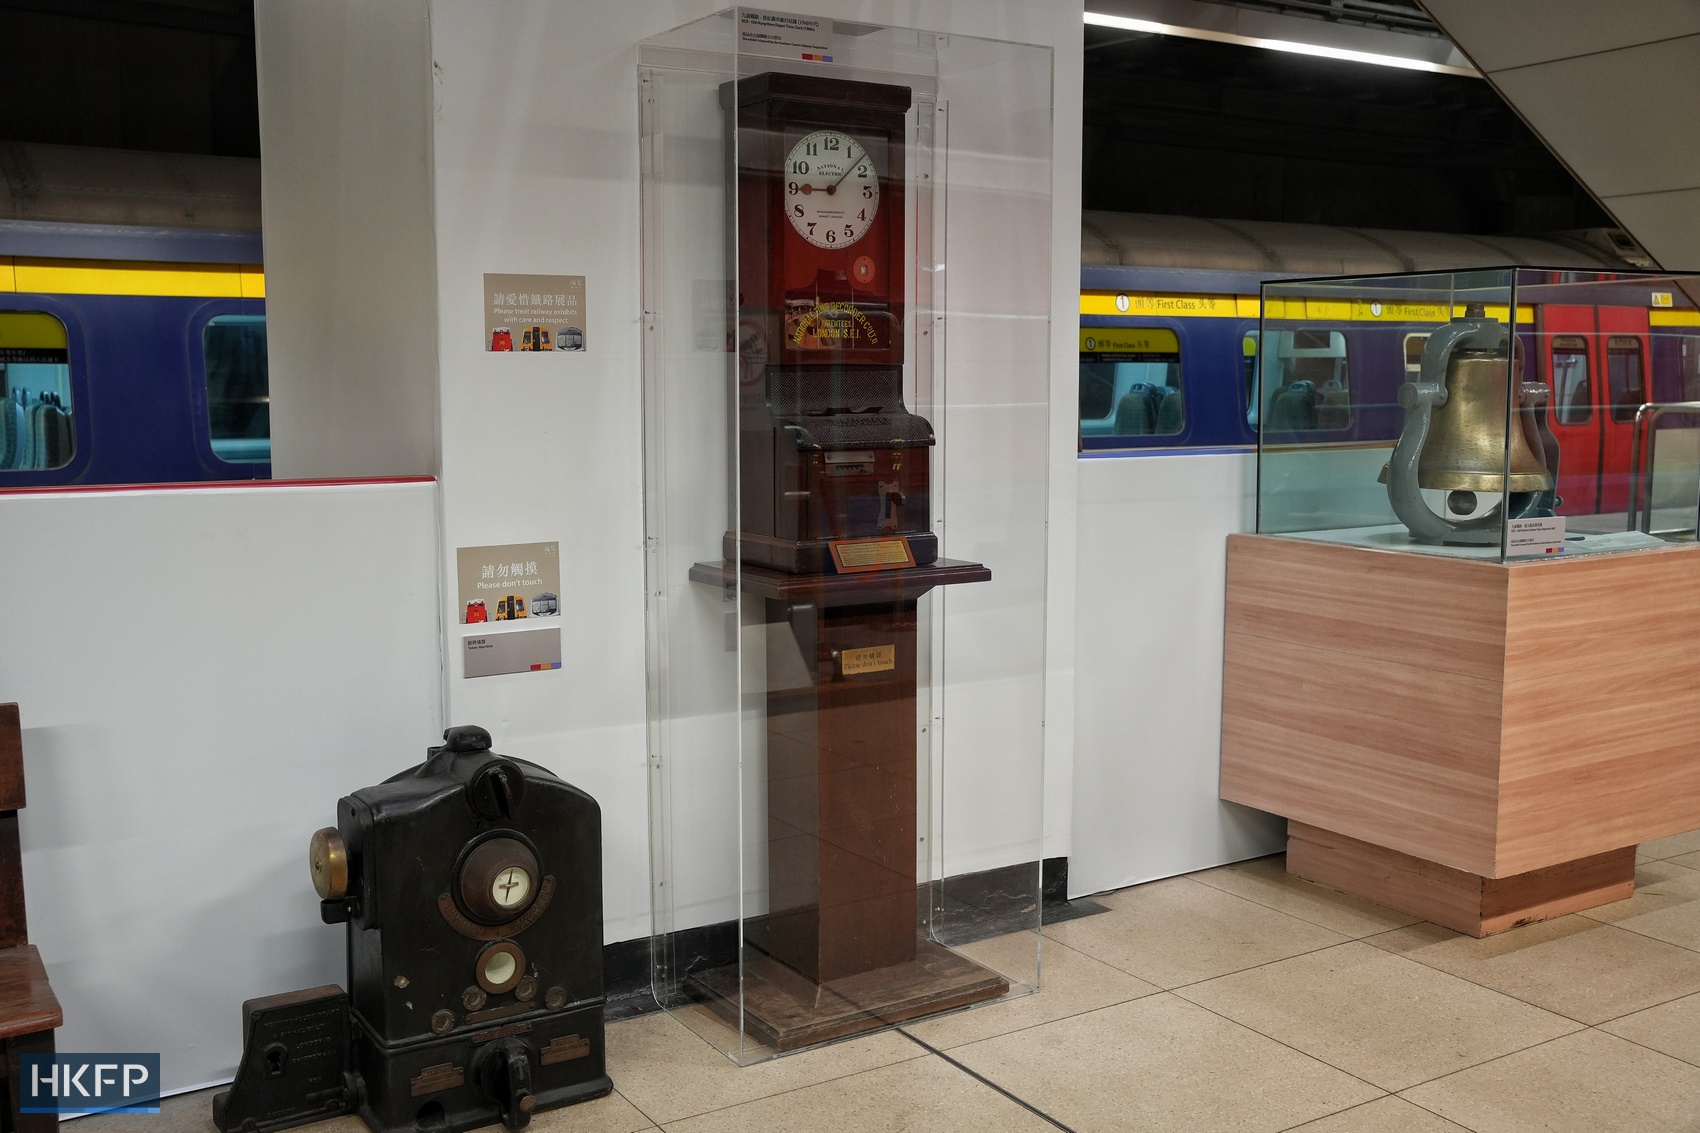 An old Hung Hom depot time clock (centre), an old Kowloon Station train departure bell (right) of the Kowloon-Canton Railway, and a black token machine are showcased at the “Station Rail Voyage” exhibition, presented by the MTR Corporation.